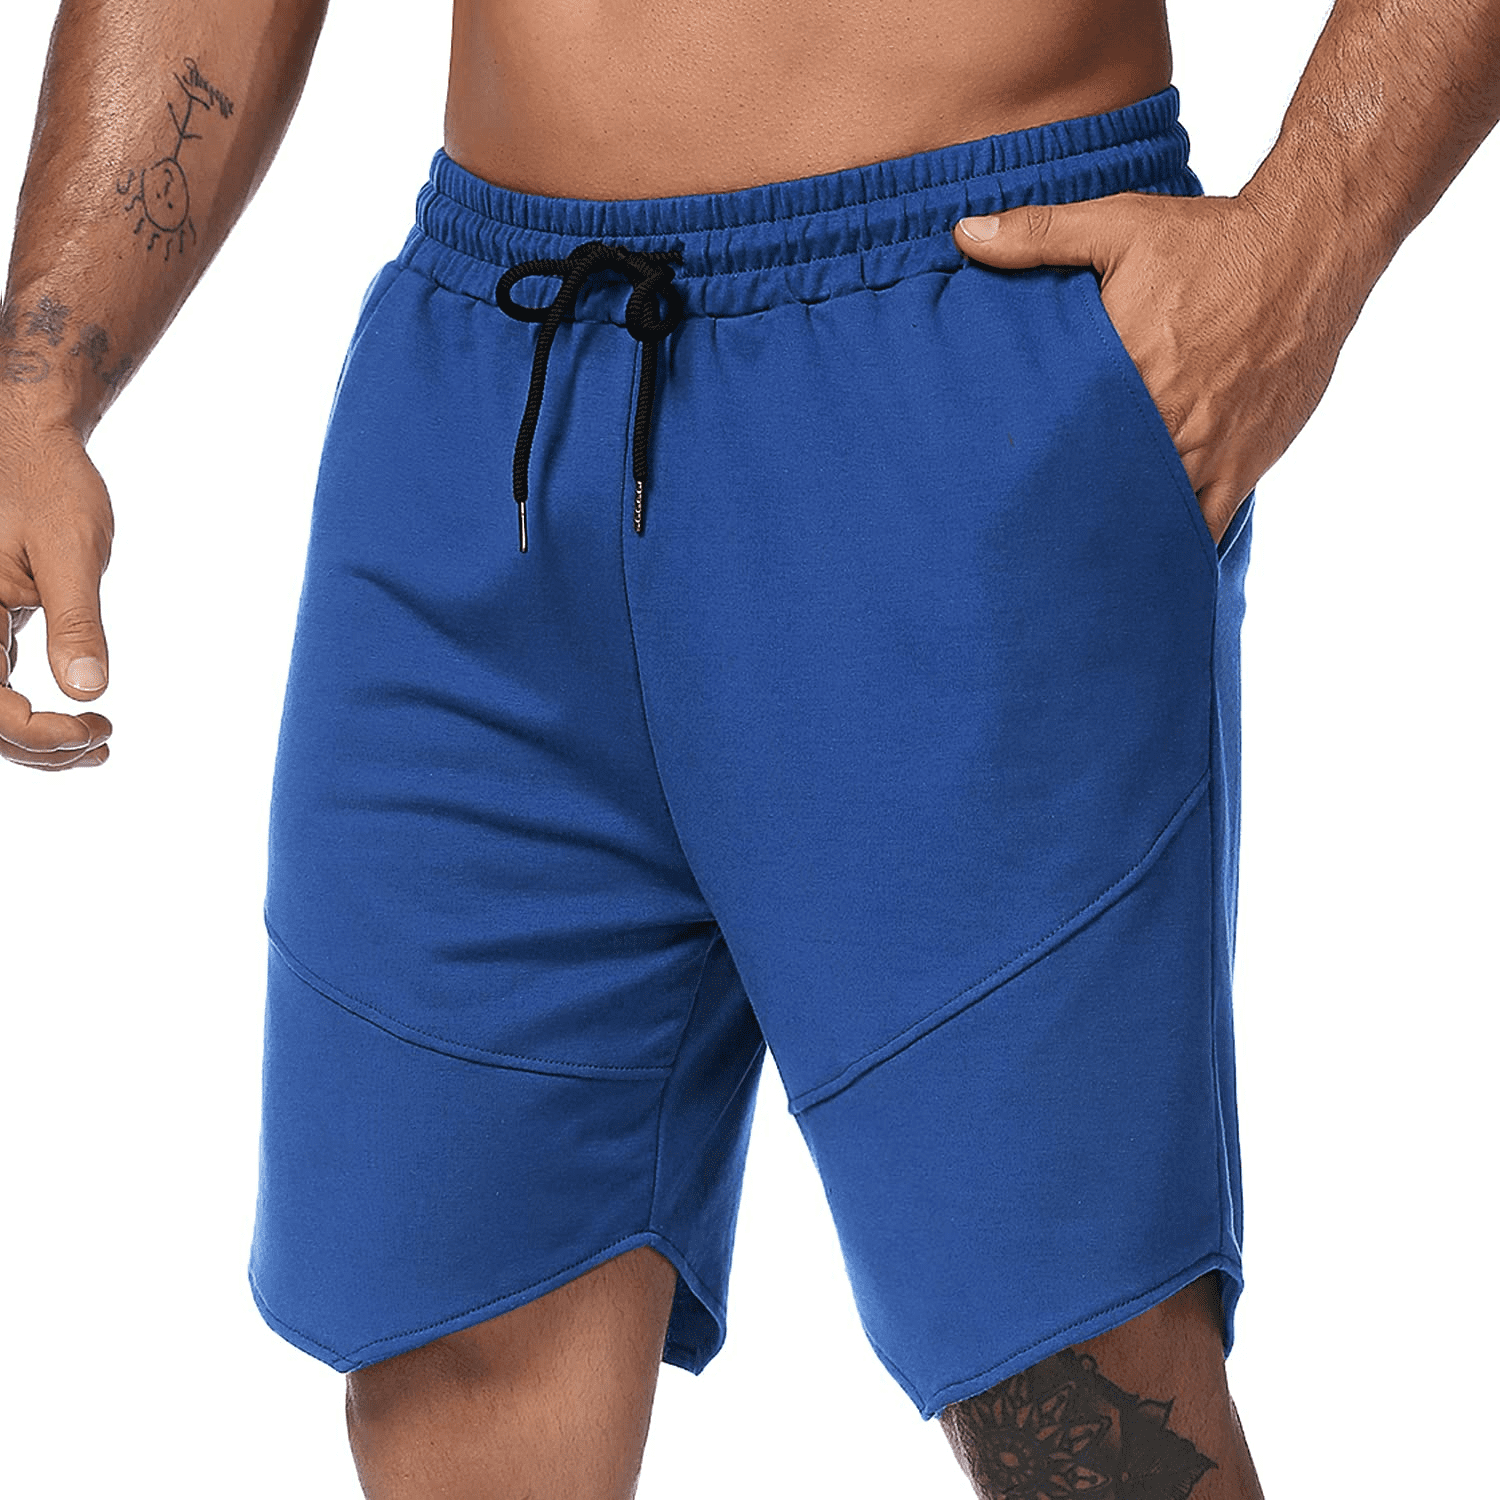 COOFANDY Men's Workout Gym Shorts Weightlifting Bodybuilding Squatting ...